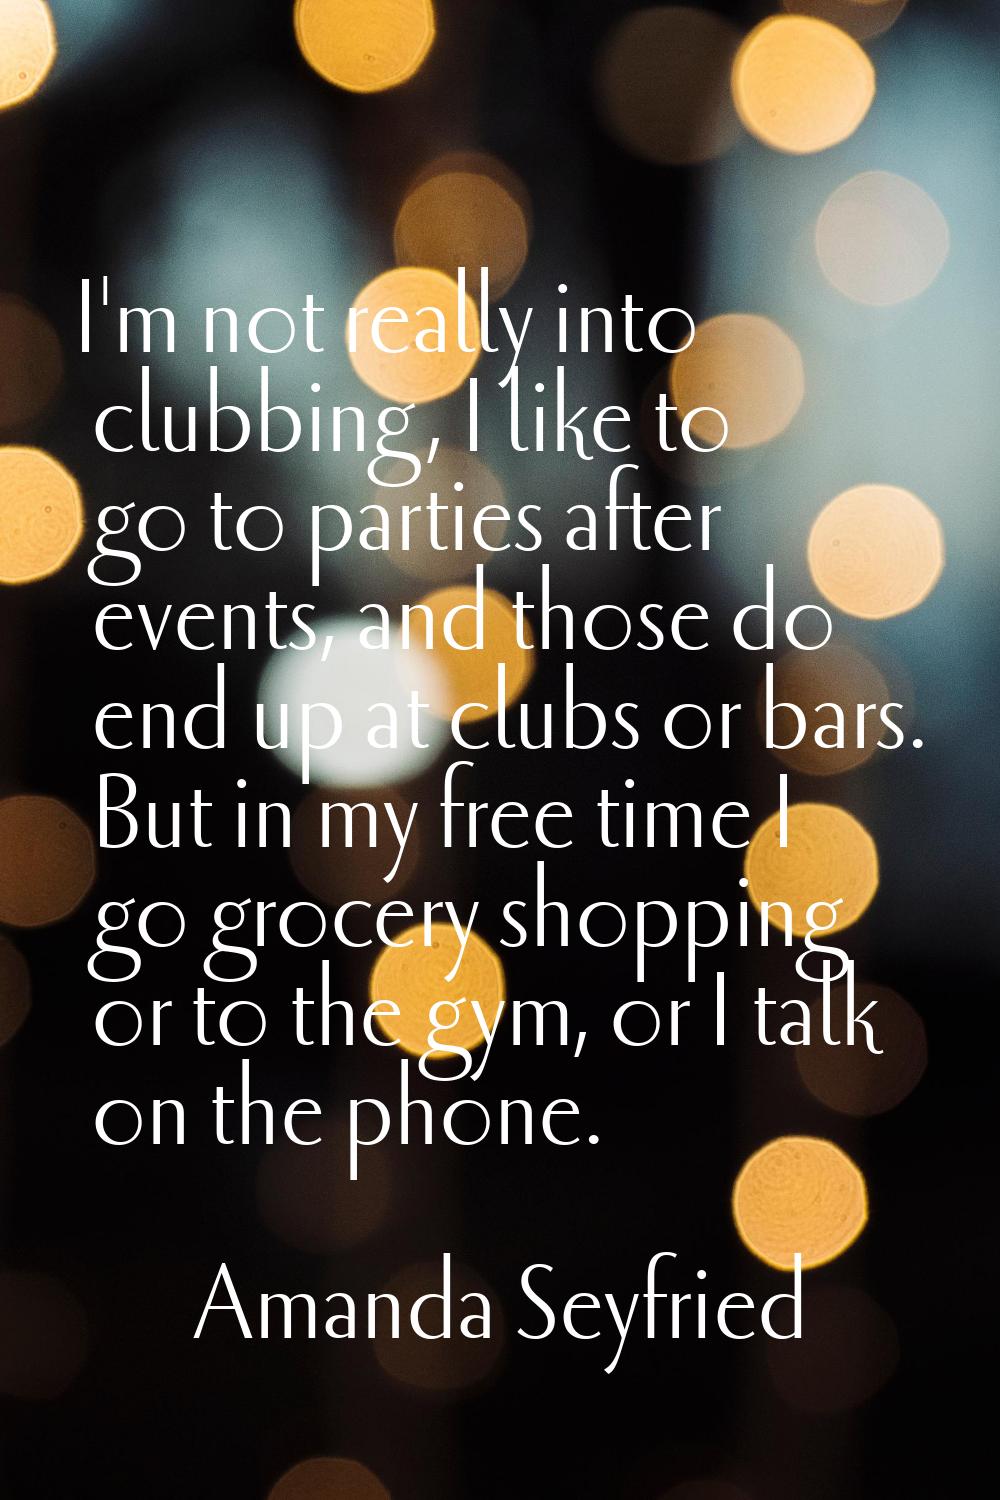 I'm not really into clubbing, I like to go to parties after events, and those do end up at clubs or